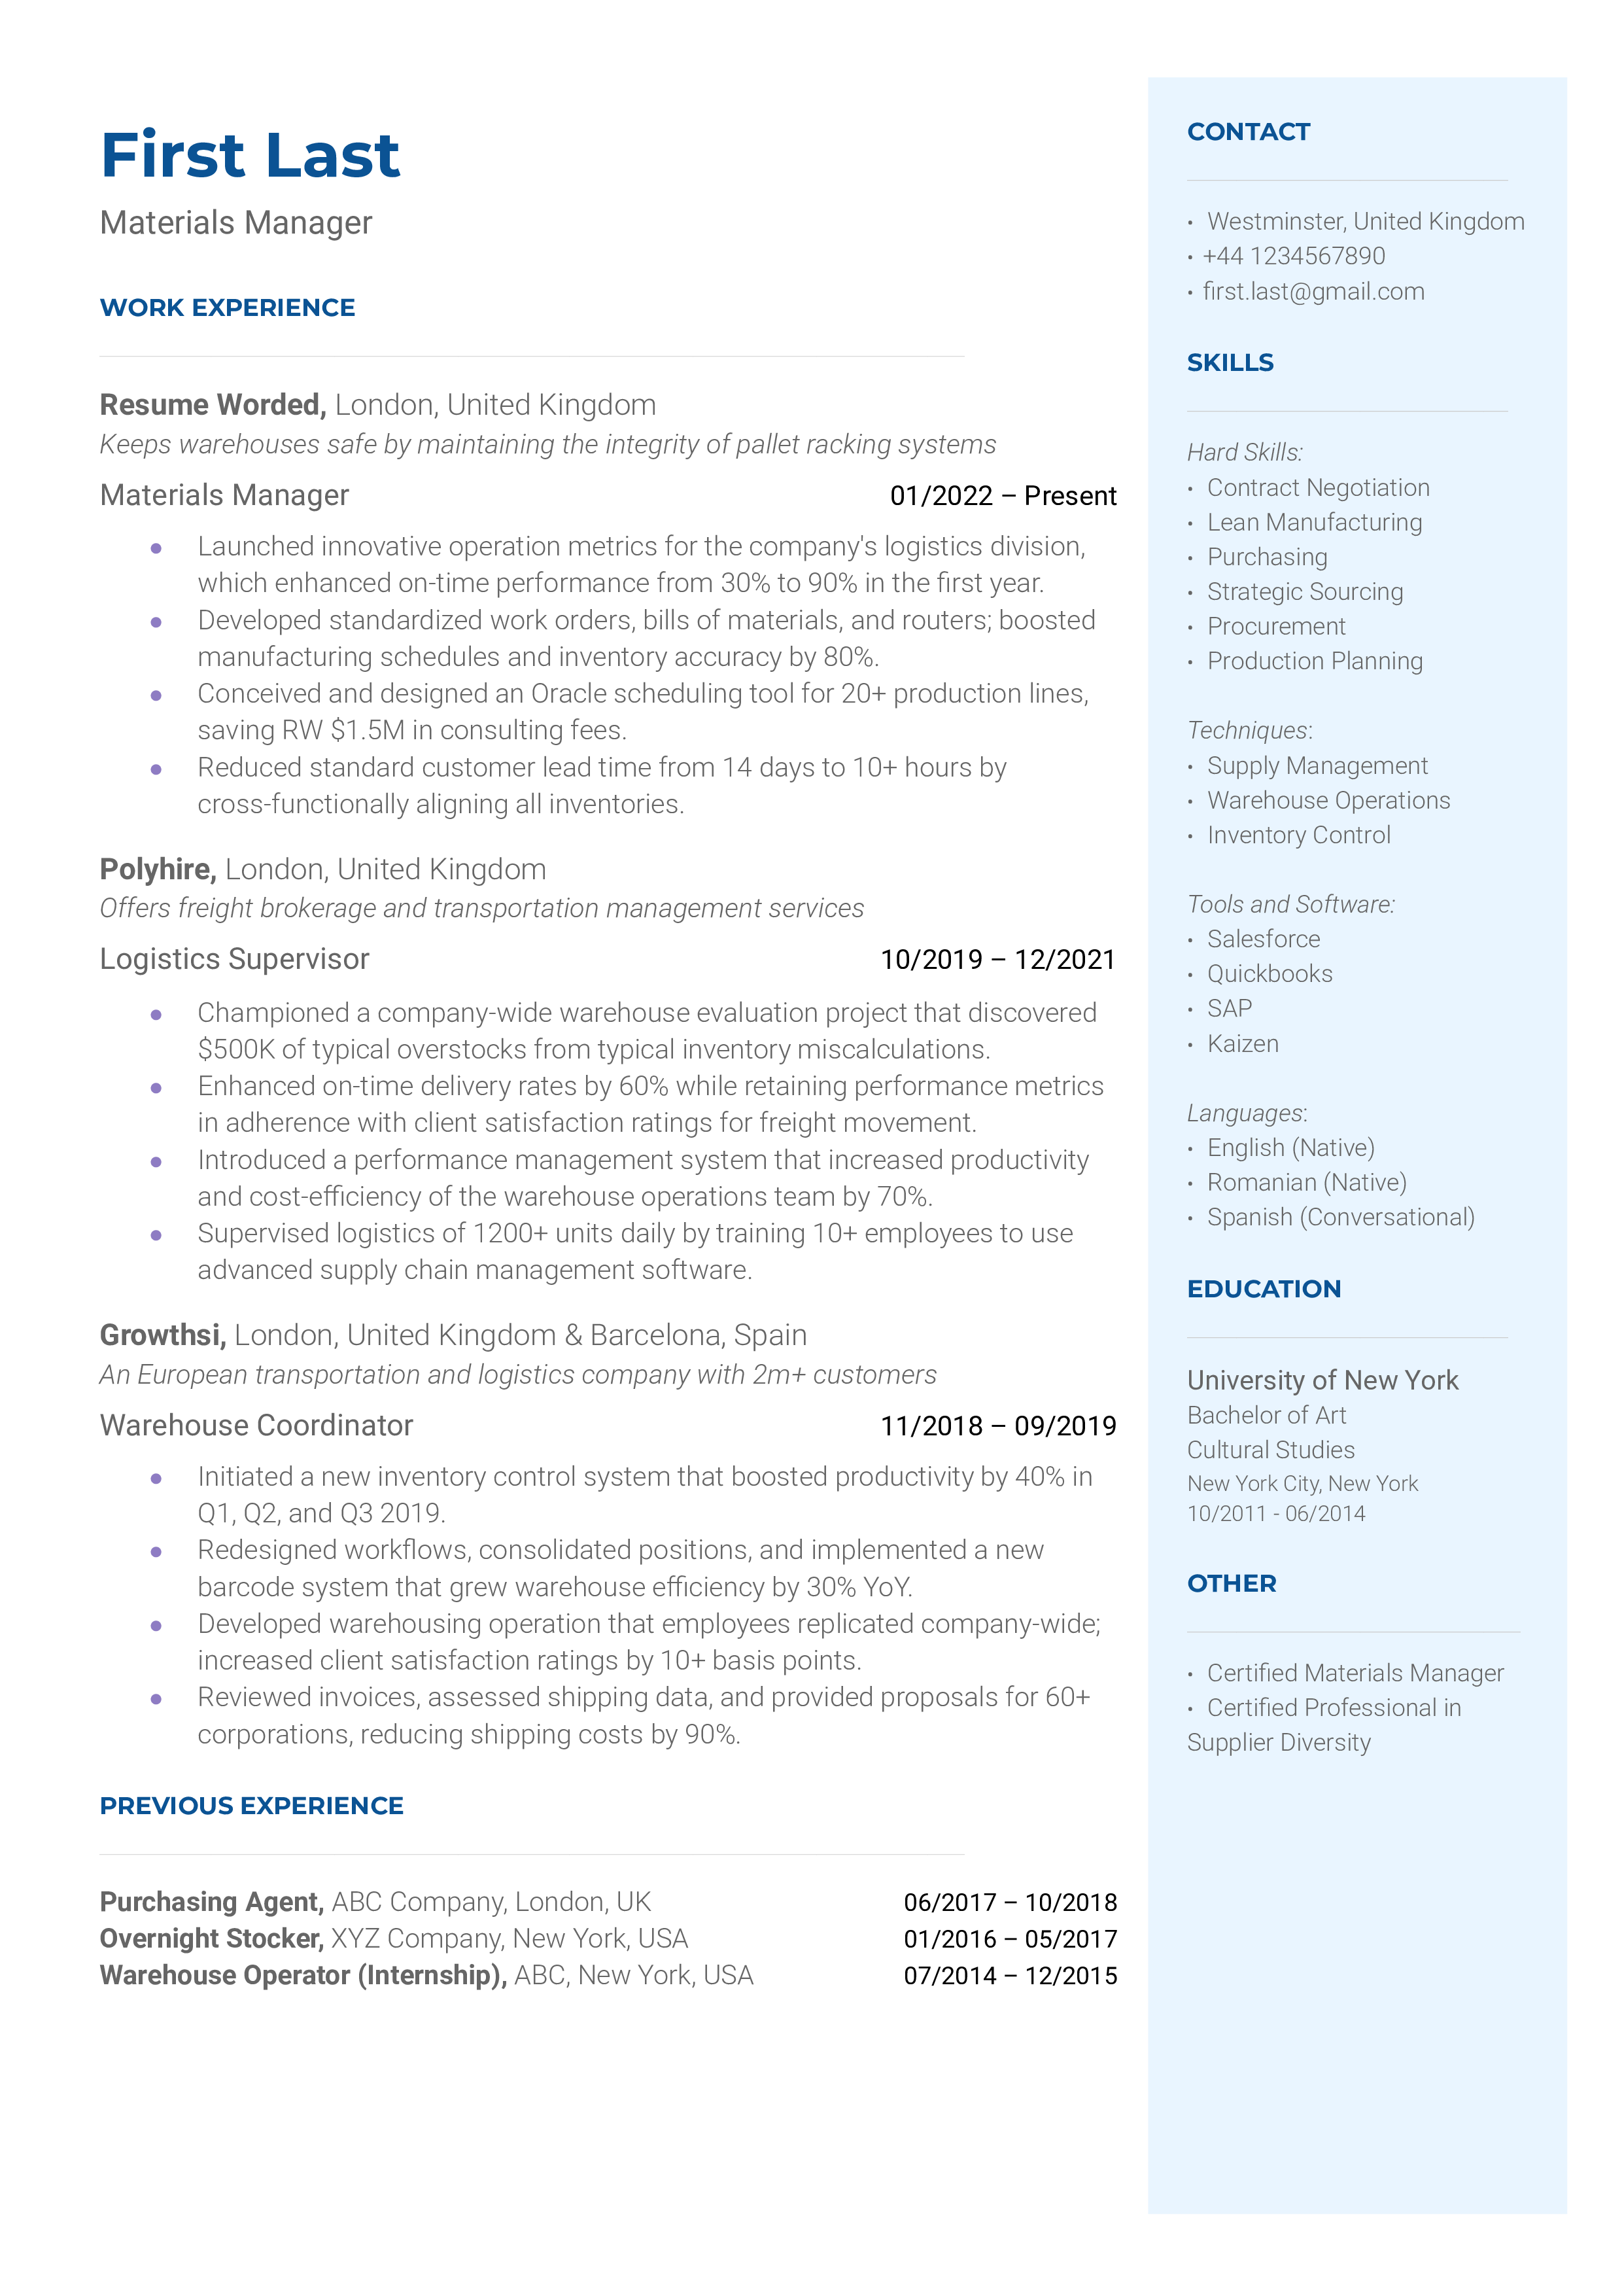 A materials manager resume template highlighting logistics experience.